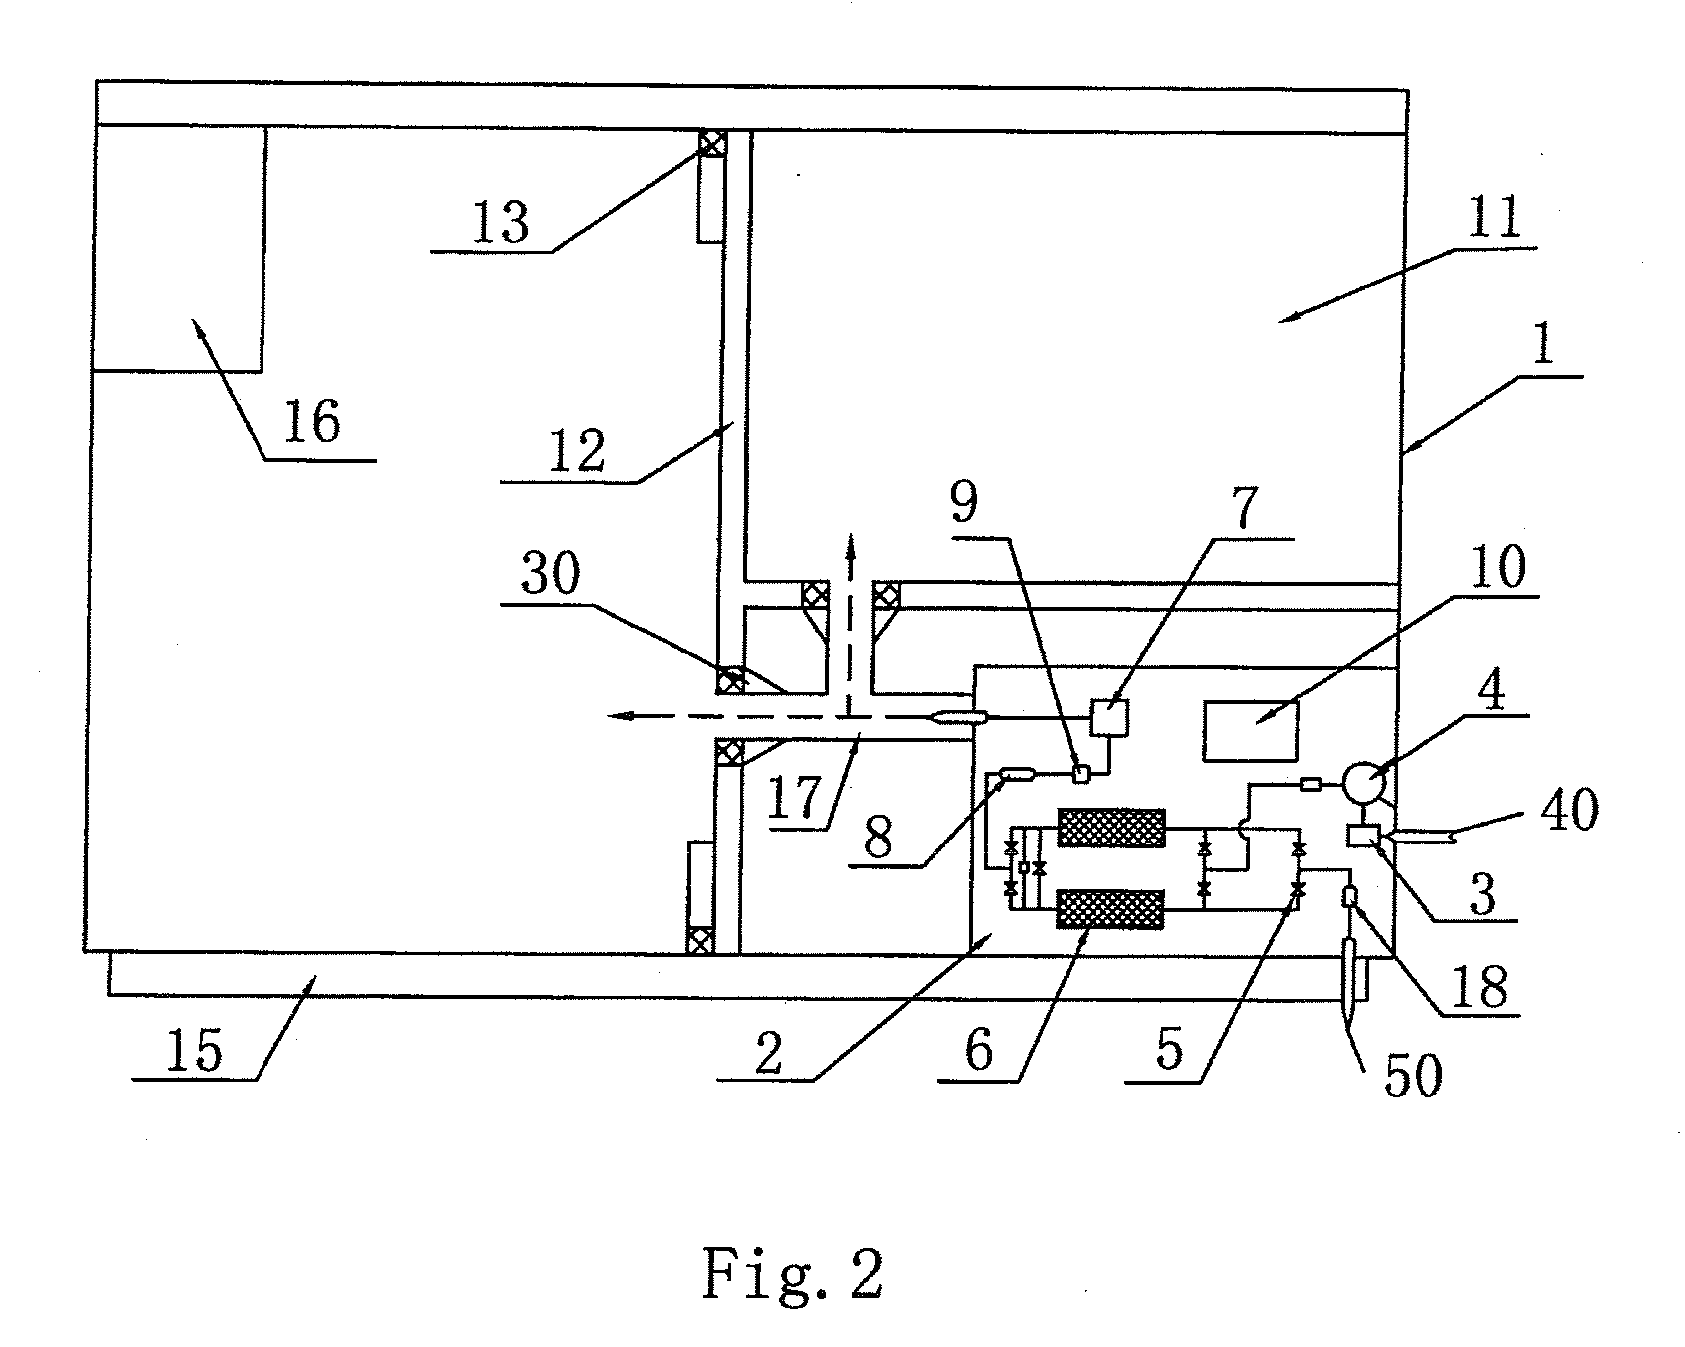 Refrigeration and freezing device with fresh-keeping function by supplying nitrogen